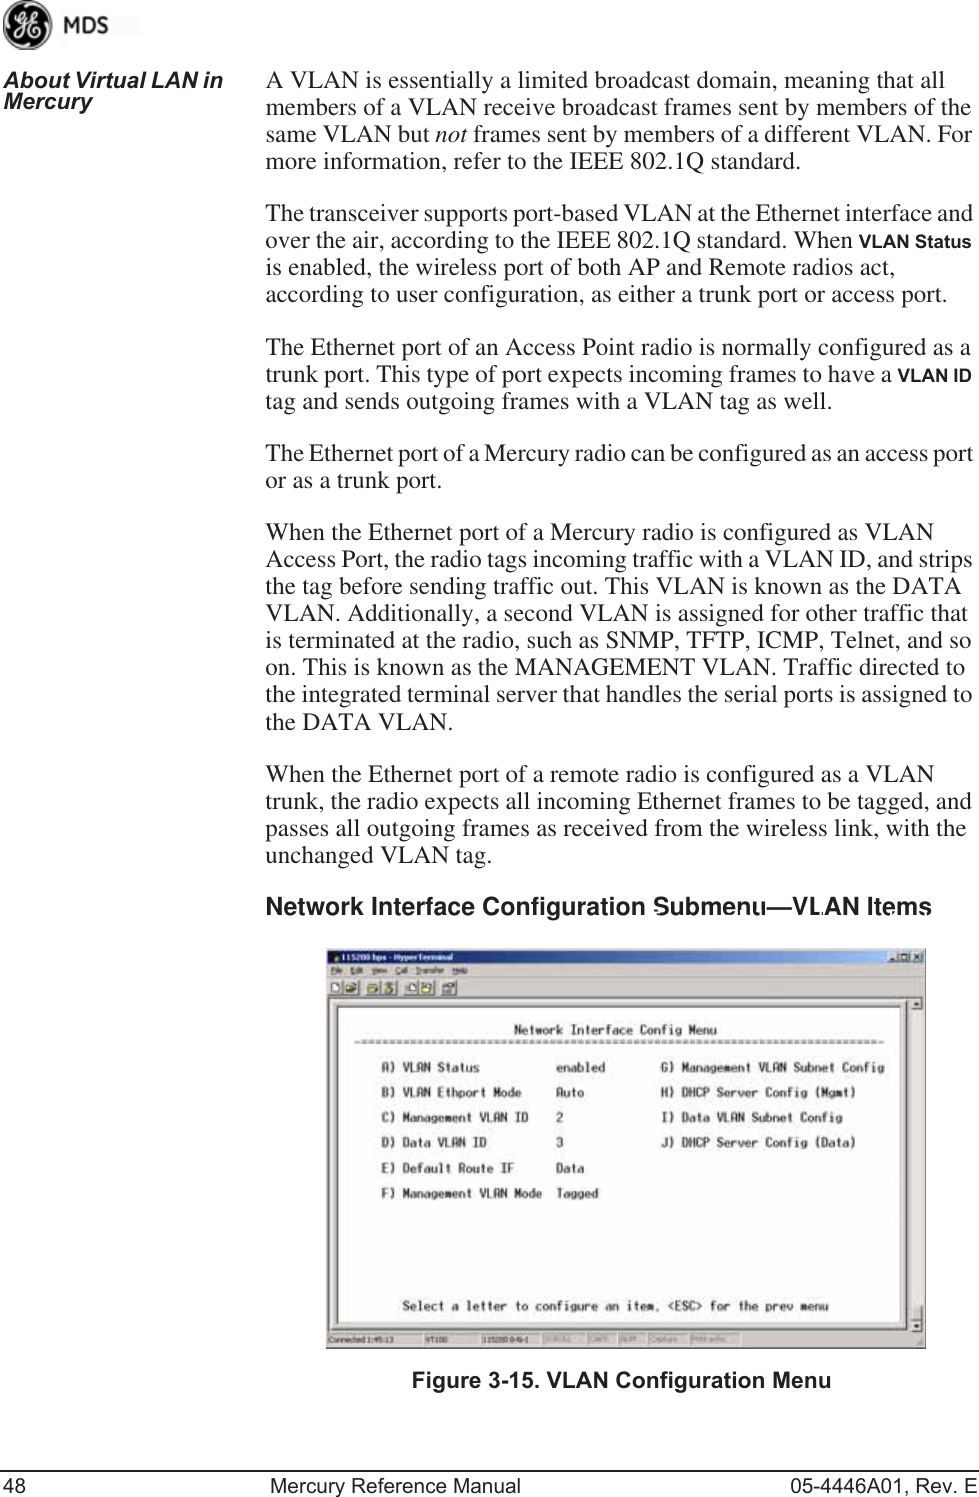 48 Mercury Reference Manual 05-4446A01, Rev. EAbout Virtual LAN in Mercury A VLAN is essentially a limited broadcast domain, meaning that all members of a VLAN receive broadcast frames sent by members of the same VLAN but not frames sent by members of a different VLAN. For more information, refer to the IEEE 802.1Q standard.The transceiver supports port-based VLAN at the Ethernet interface and over the air, according to the IEEE 802.1Q standard. When VLAN Status is enabled, the wireless port of both AP and Remote radios act, according to user configuration, as either a trunk port or access port. The Ethernet port of an Access Point radio is normally configured as a trunk port. This type of port expects incoming frames to have a VLAN ID tag and sends outgoing frames with a VLAN tag as well.The Ethernet port of a Mercury radio can be configured as an access port or as a trunk port. When the Ethernet port of a Mercury radio is configured as VLAN Access Port, the radio tags incoming traffic with a VLAN ID, and strips the tag before sending traffic out. This VLAN is known as the DATA VLAN. Additionally, a second VLAN is assigned for other traffic that is terminated at the radio, such as SNMP, TFTP, ICMP, Telnet, and so on. This is known as the MANAGEMENT VLAN. Traffic directed to the integrated terminal server that handles the serial ports is assigned to the DATA VLAN.When the Ethernet port of a remote radio is configured as a VLAN trunk, the radio expects all incoming Ethernet frames to be tagged, and passes all outgoing frames as received from the wireless link, with the unchanged VLAN tag.Network Interface Configuration Submenu—VLAN ItemsInvisible place holderFigure 3-15. VLAN Configuration Menu 